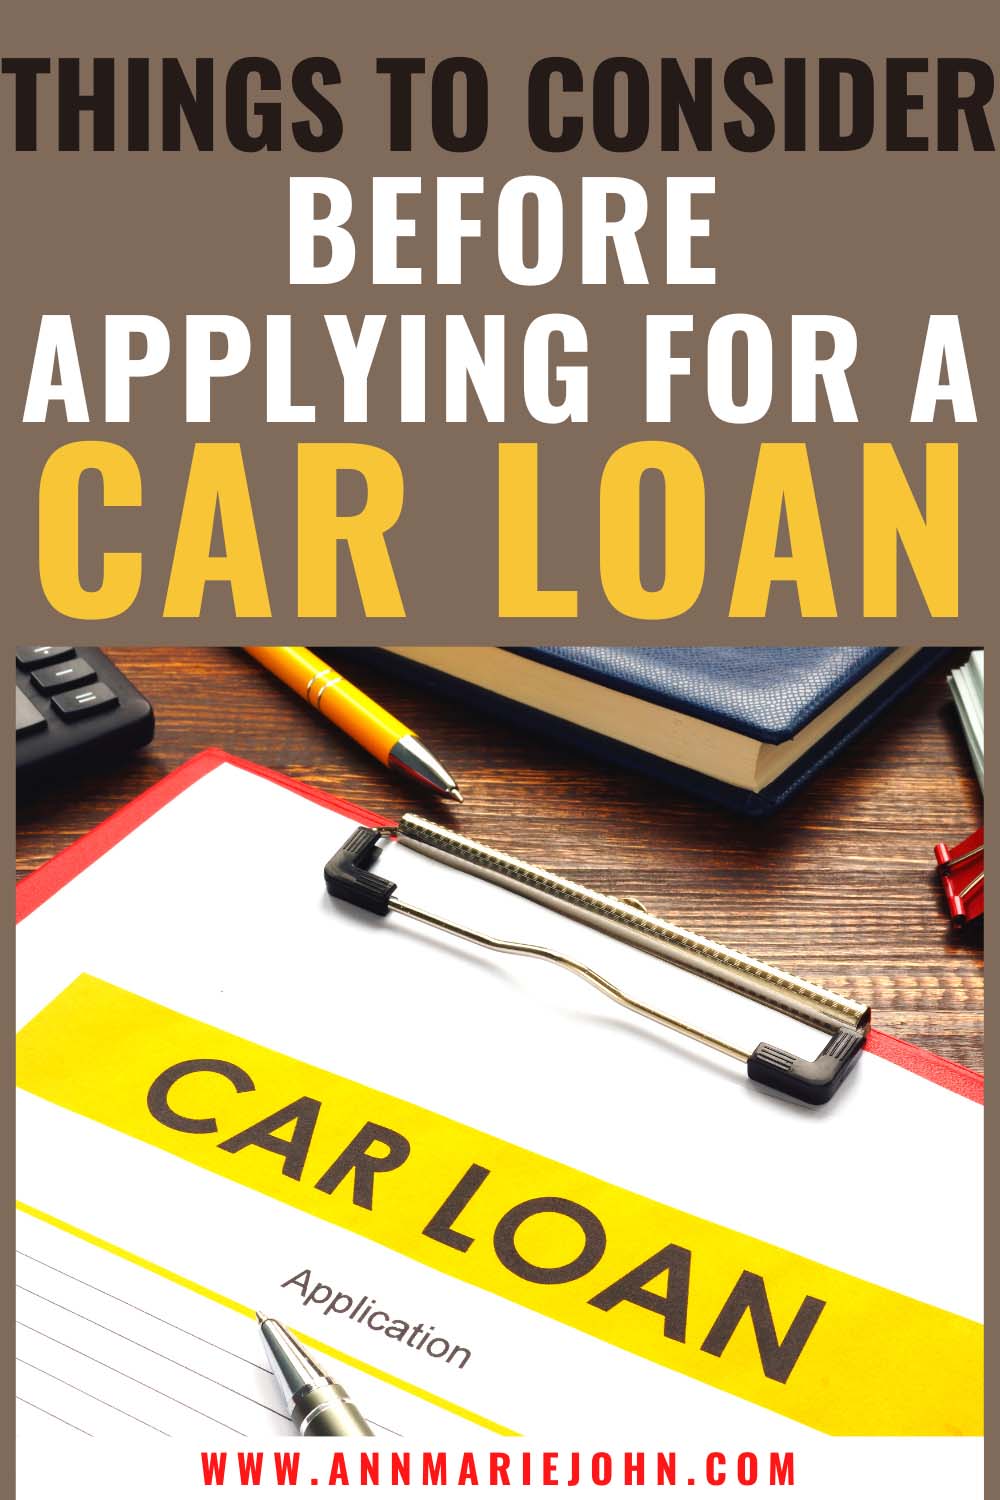 Things to Consider Before Applying for a Car Loan